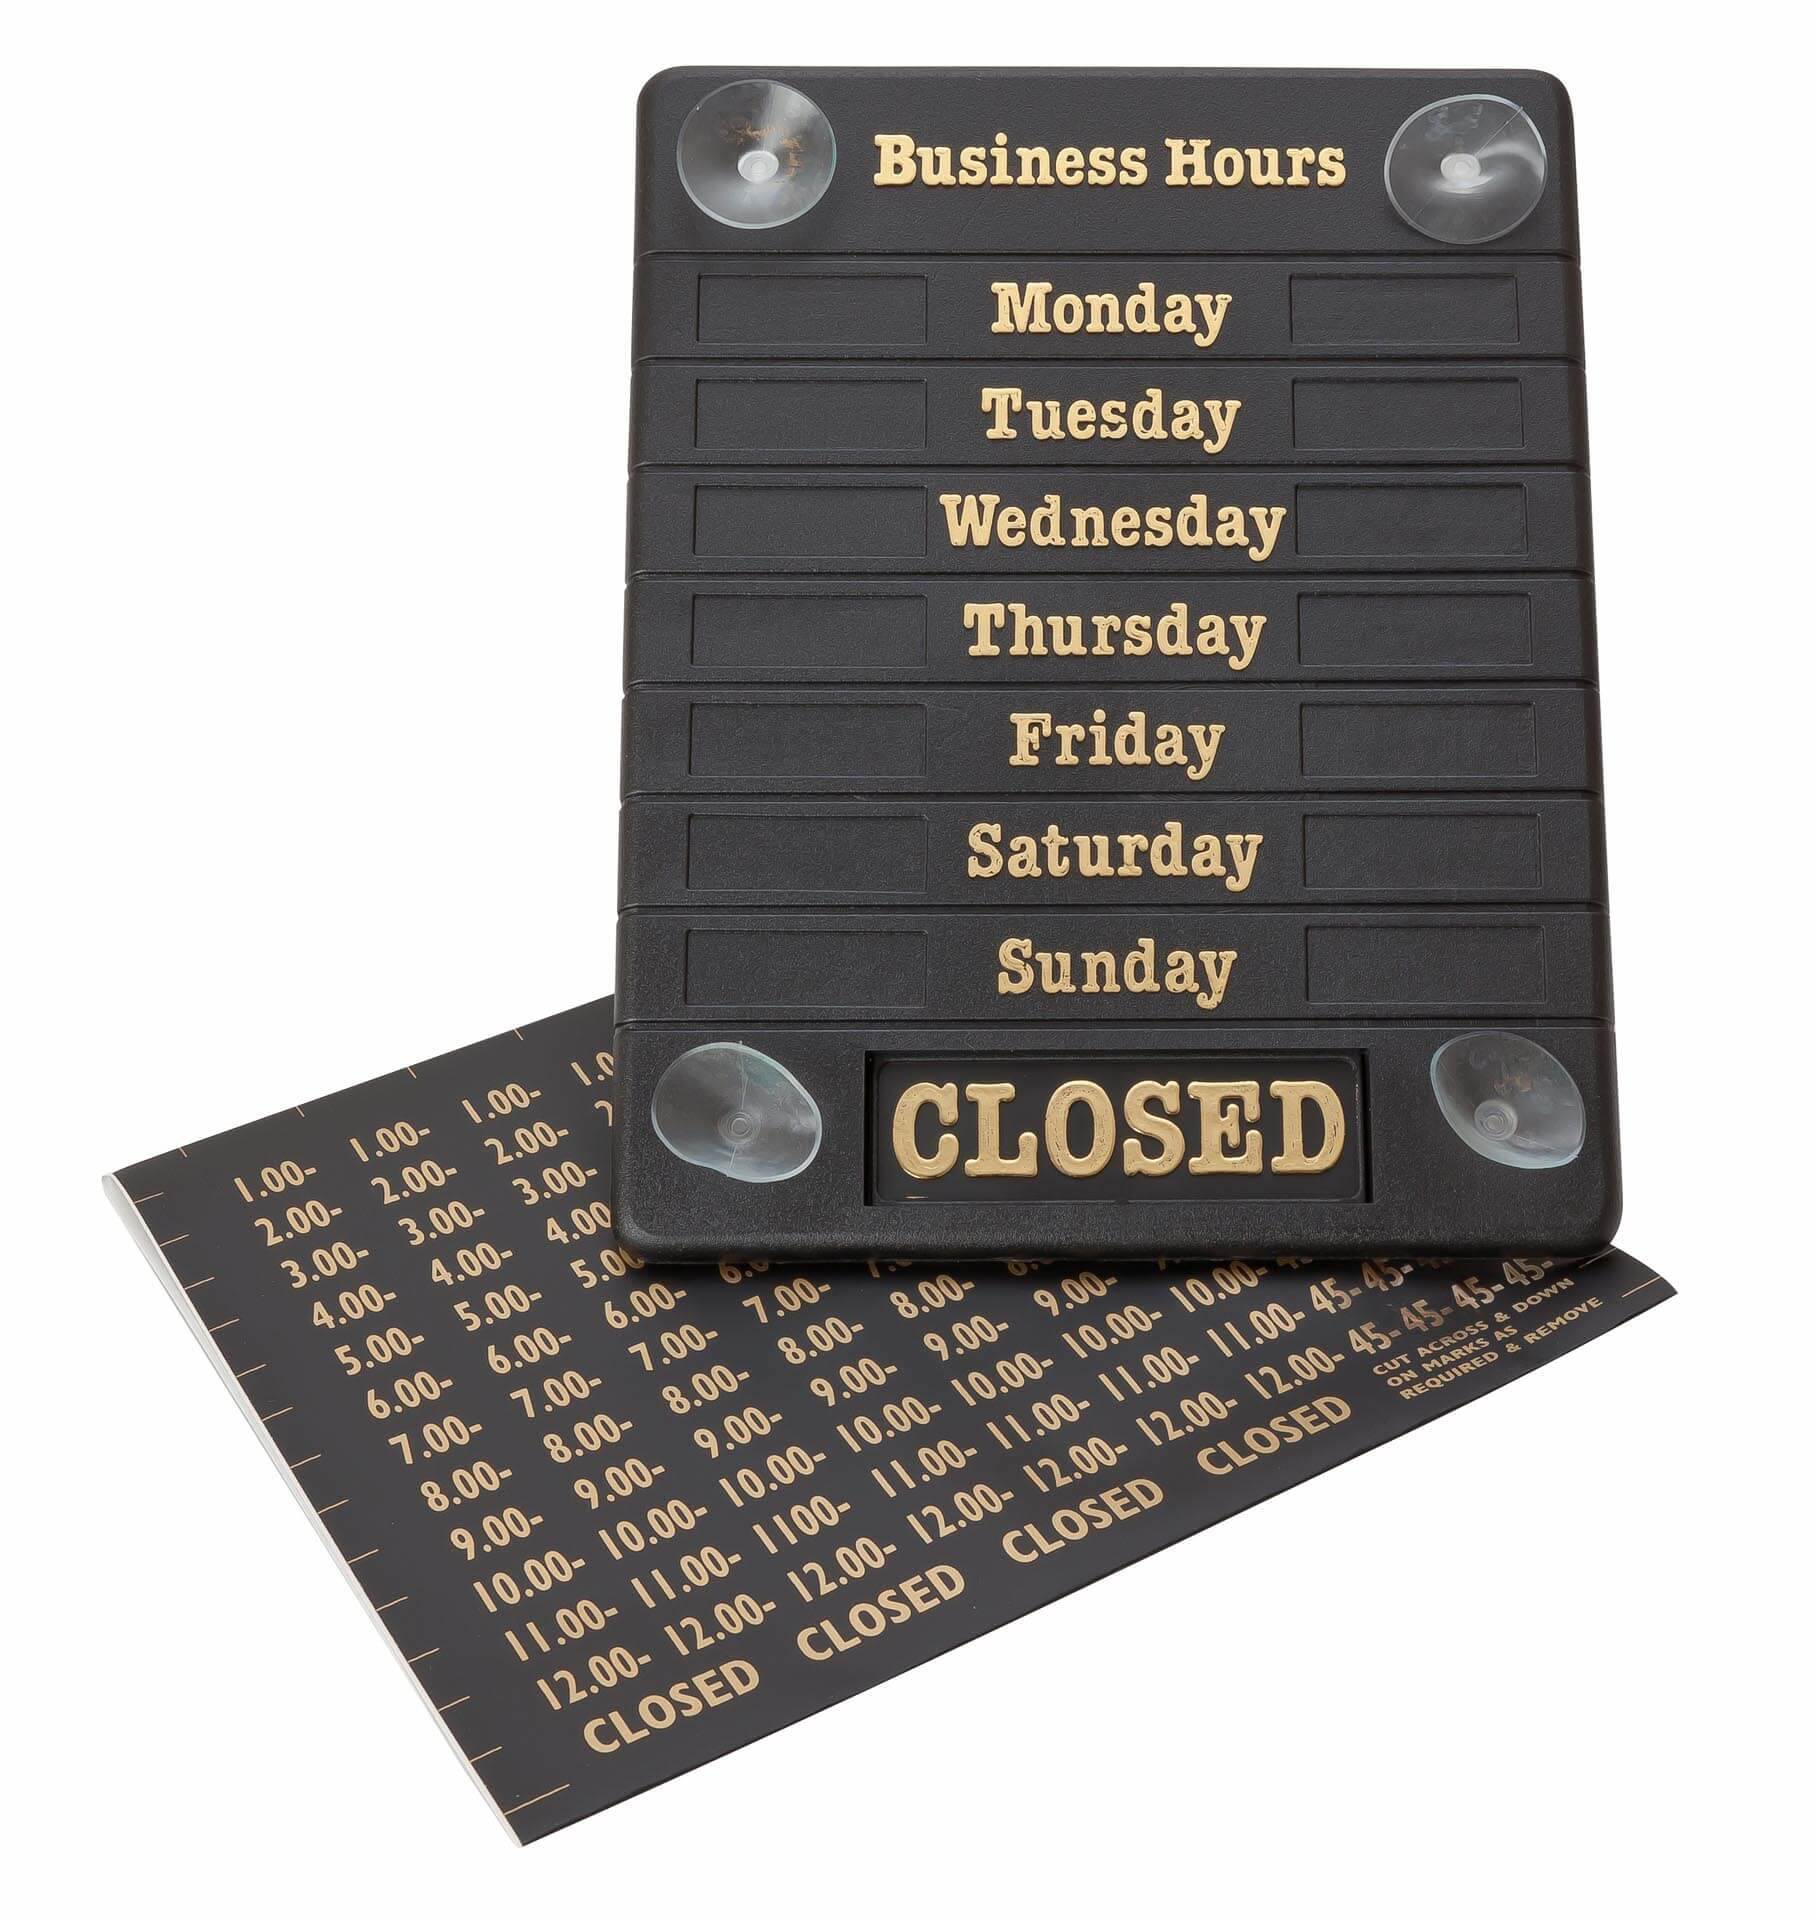 BEAUMONT HOURS OF BUSINESS SIGN BAR-B192